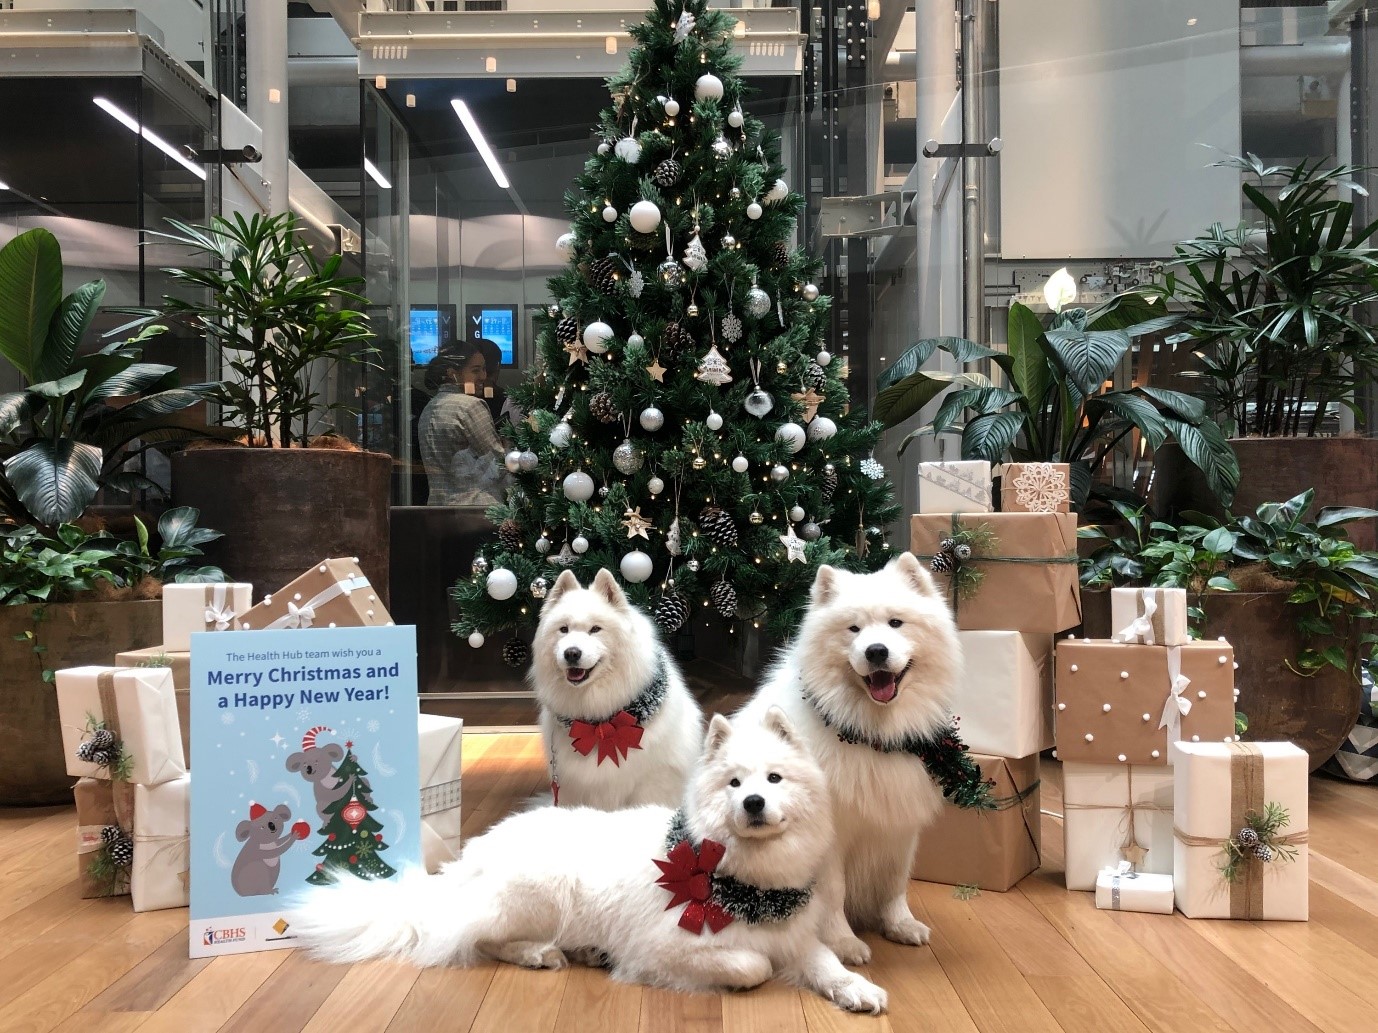 Samoyed dogs visited CommBank staff at last Christmas